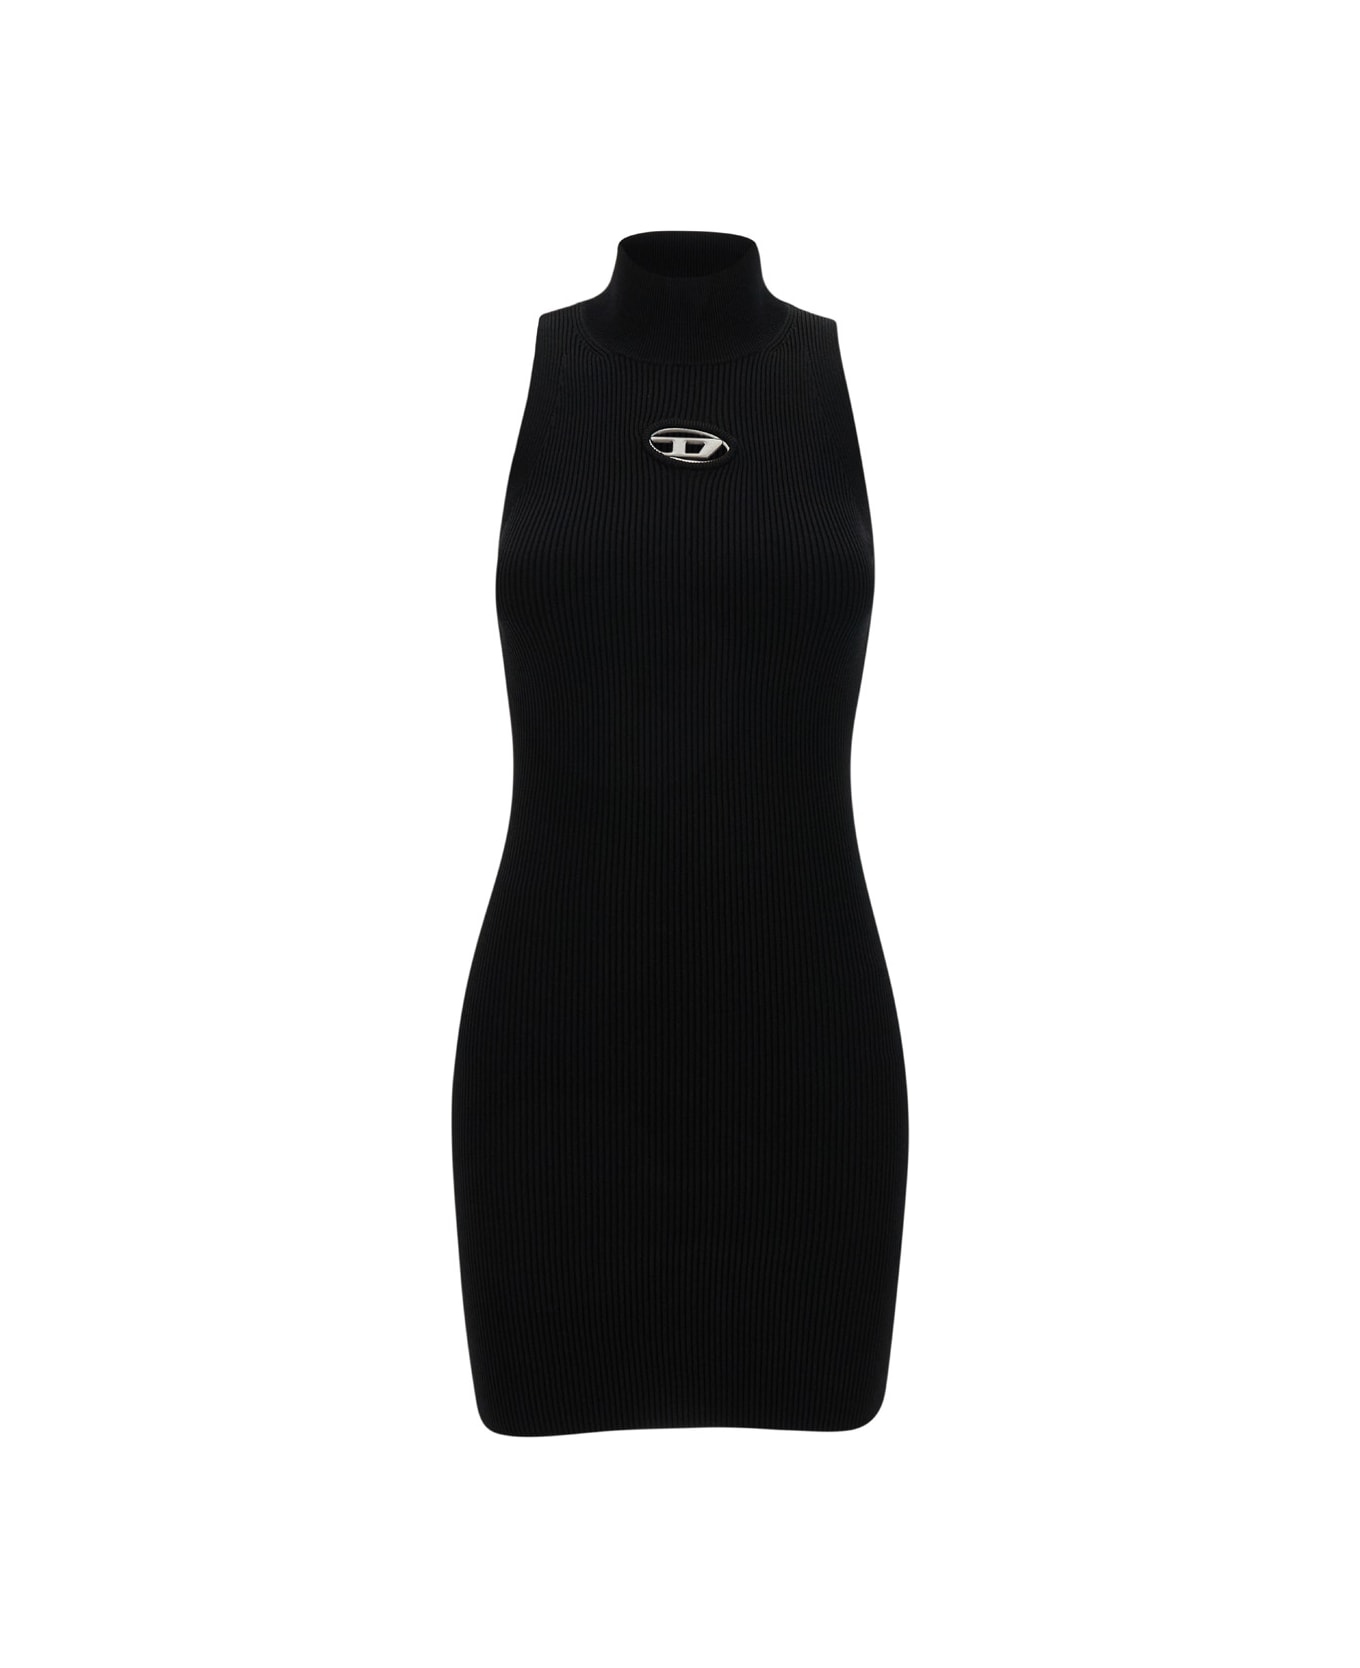 Diesel Mini Black Dress With Oval D Cut Out Detai In Viscose Womanl - Black ワンピース＆ドレス